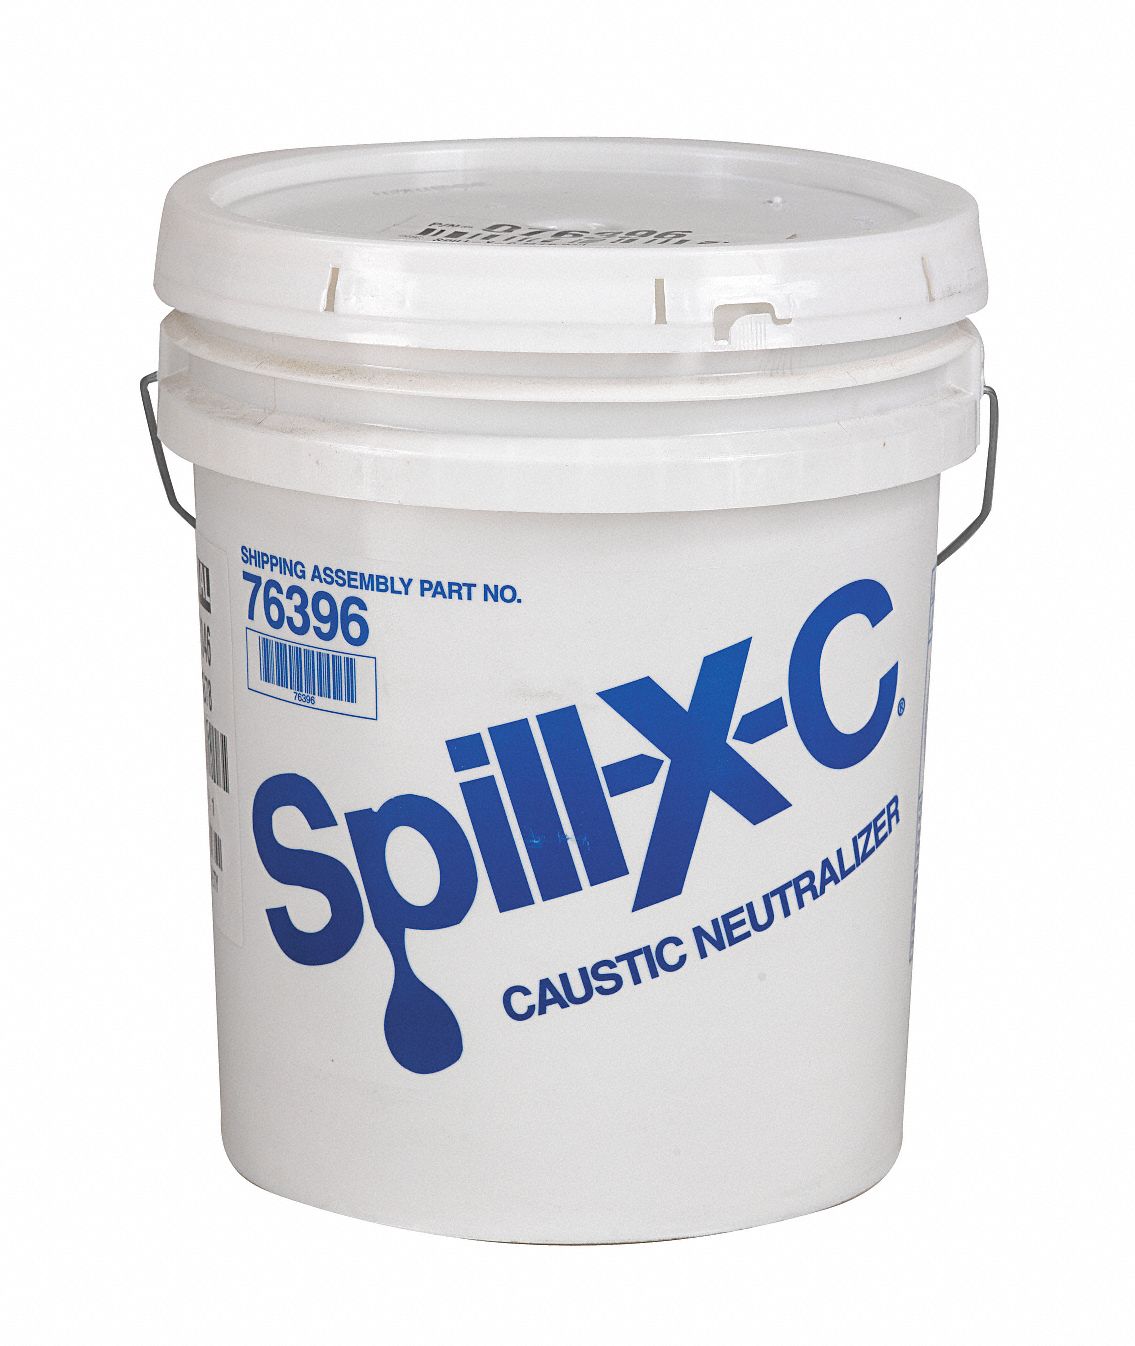 Solidifying Base Neutralizer: 3 gal Volume Absorbed per Pkg., 42 lb Wt, Pail, Bases, SPILL-X-C